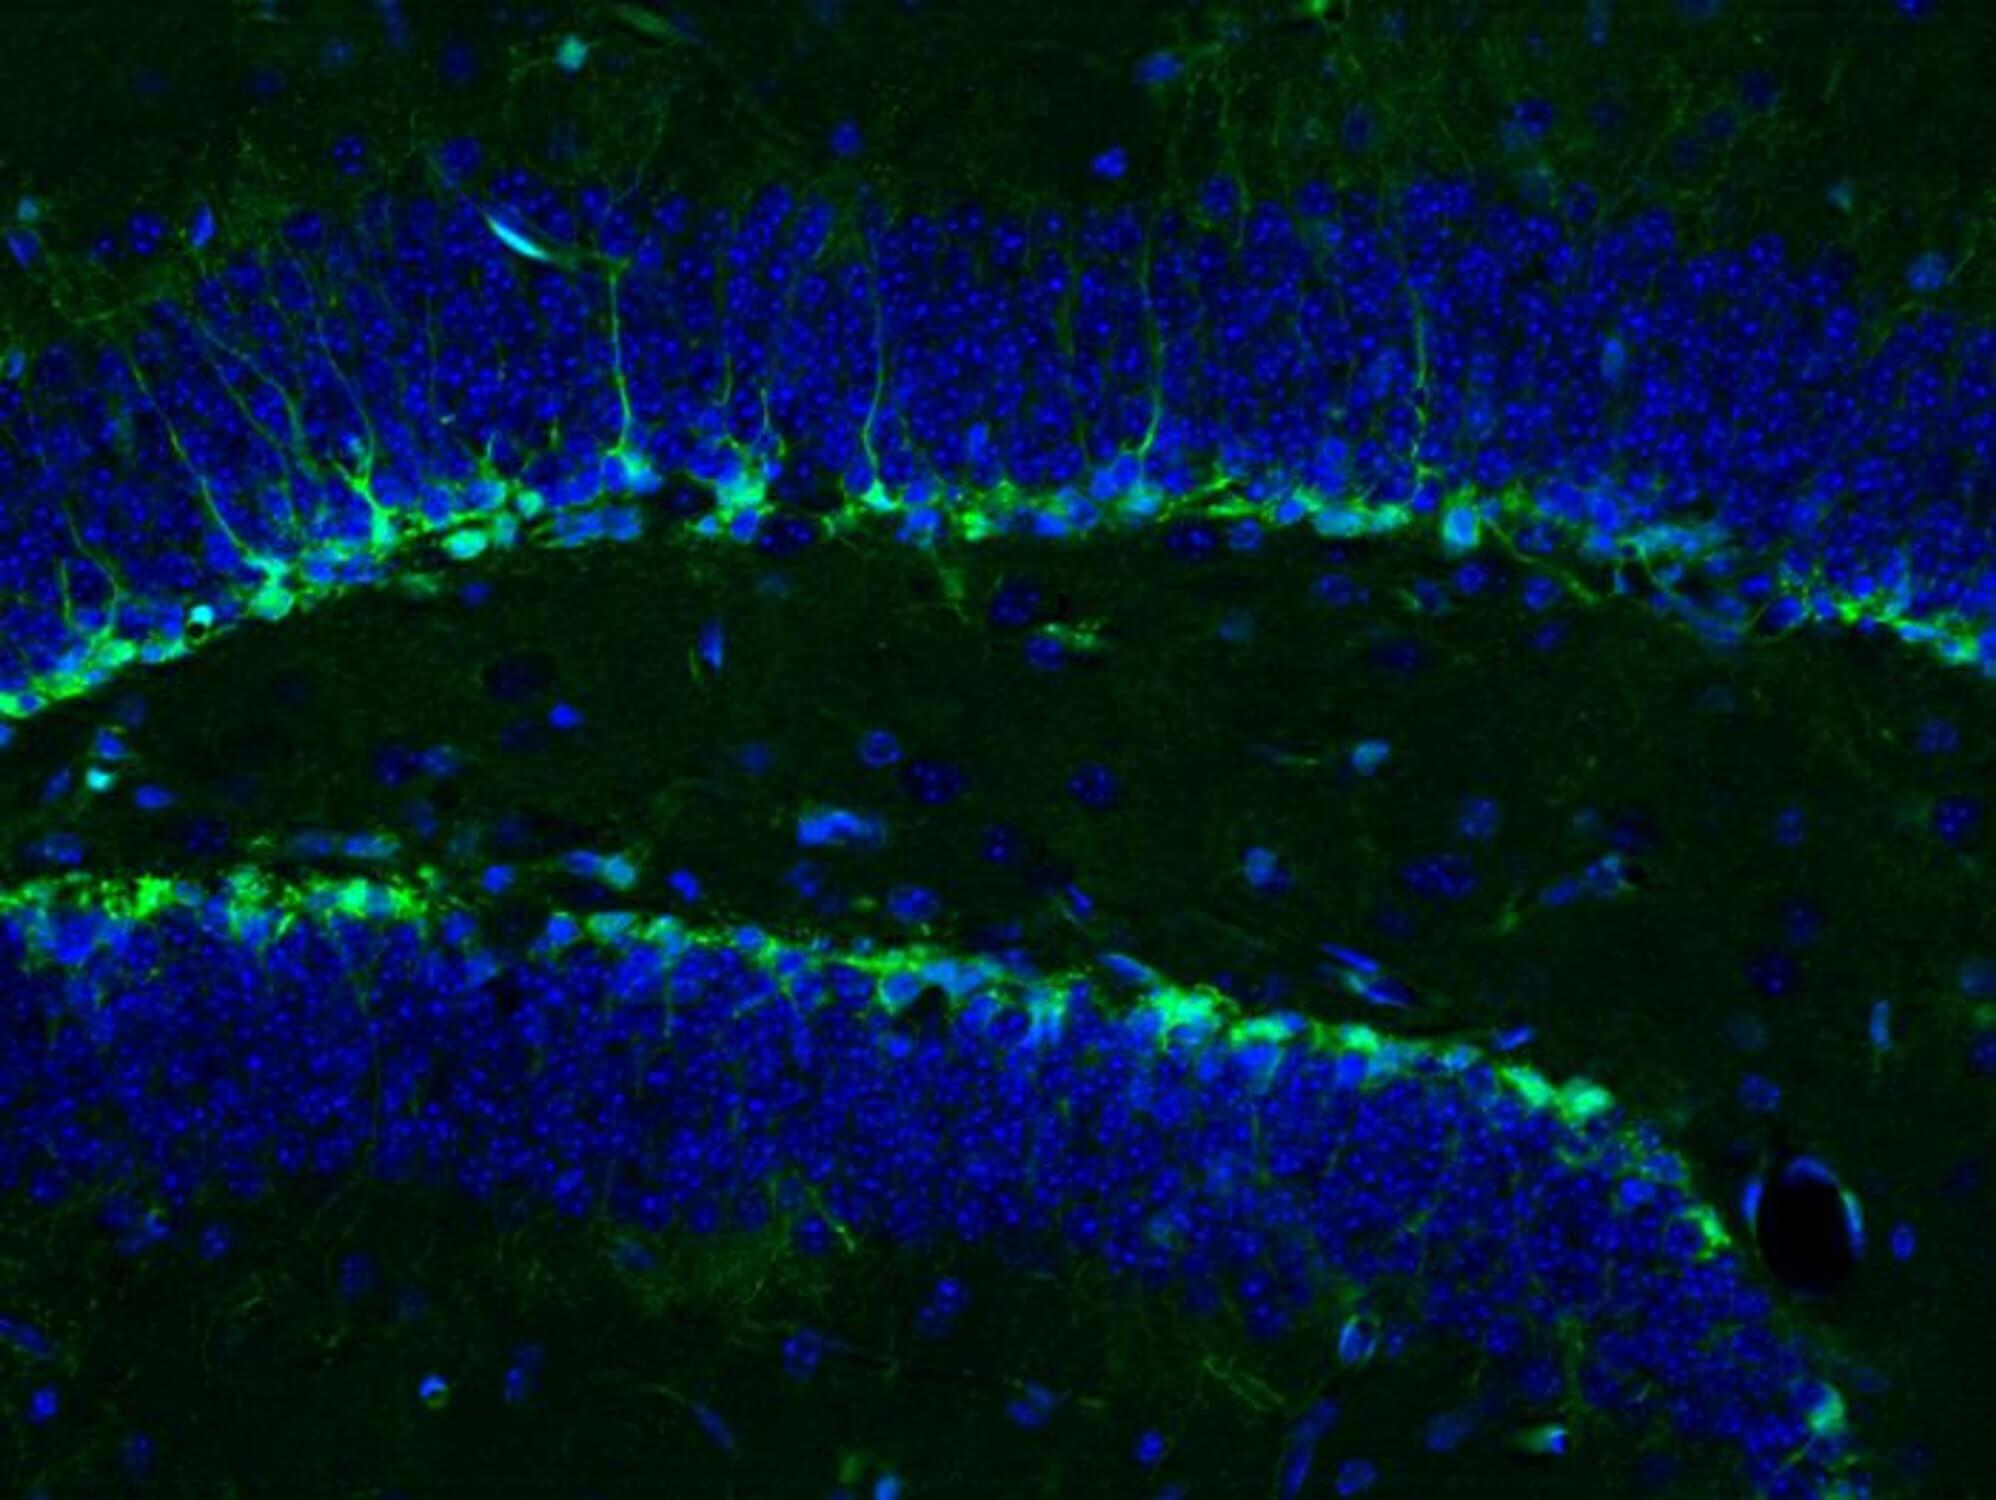 Neural stem cells in a mouse hippocampus shown in green (cell bodies shown in blue) give rise to new mature neurons